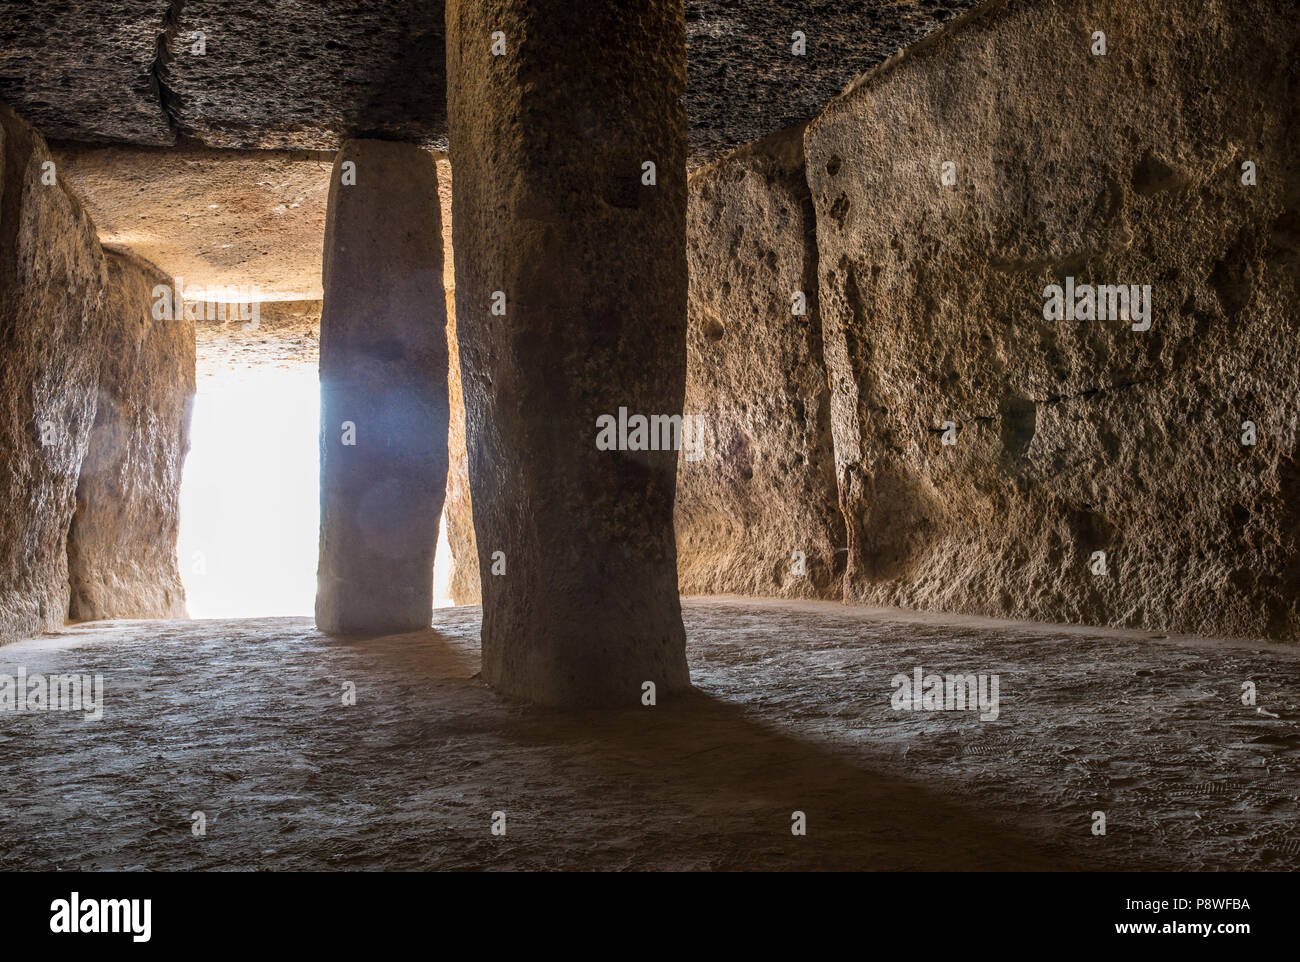 Antequera, Spain - July 10th, 2018: Dolmen of Menga chamber, Antequera. Sun rays entering at corridor Stock Photo